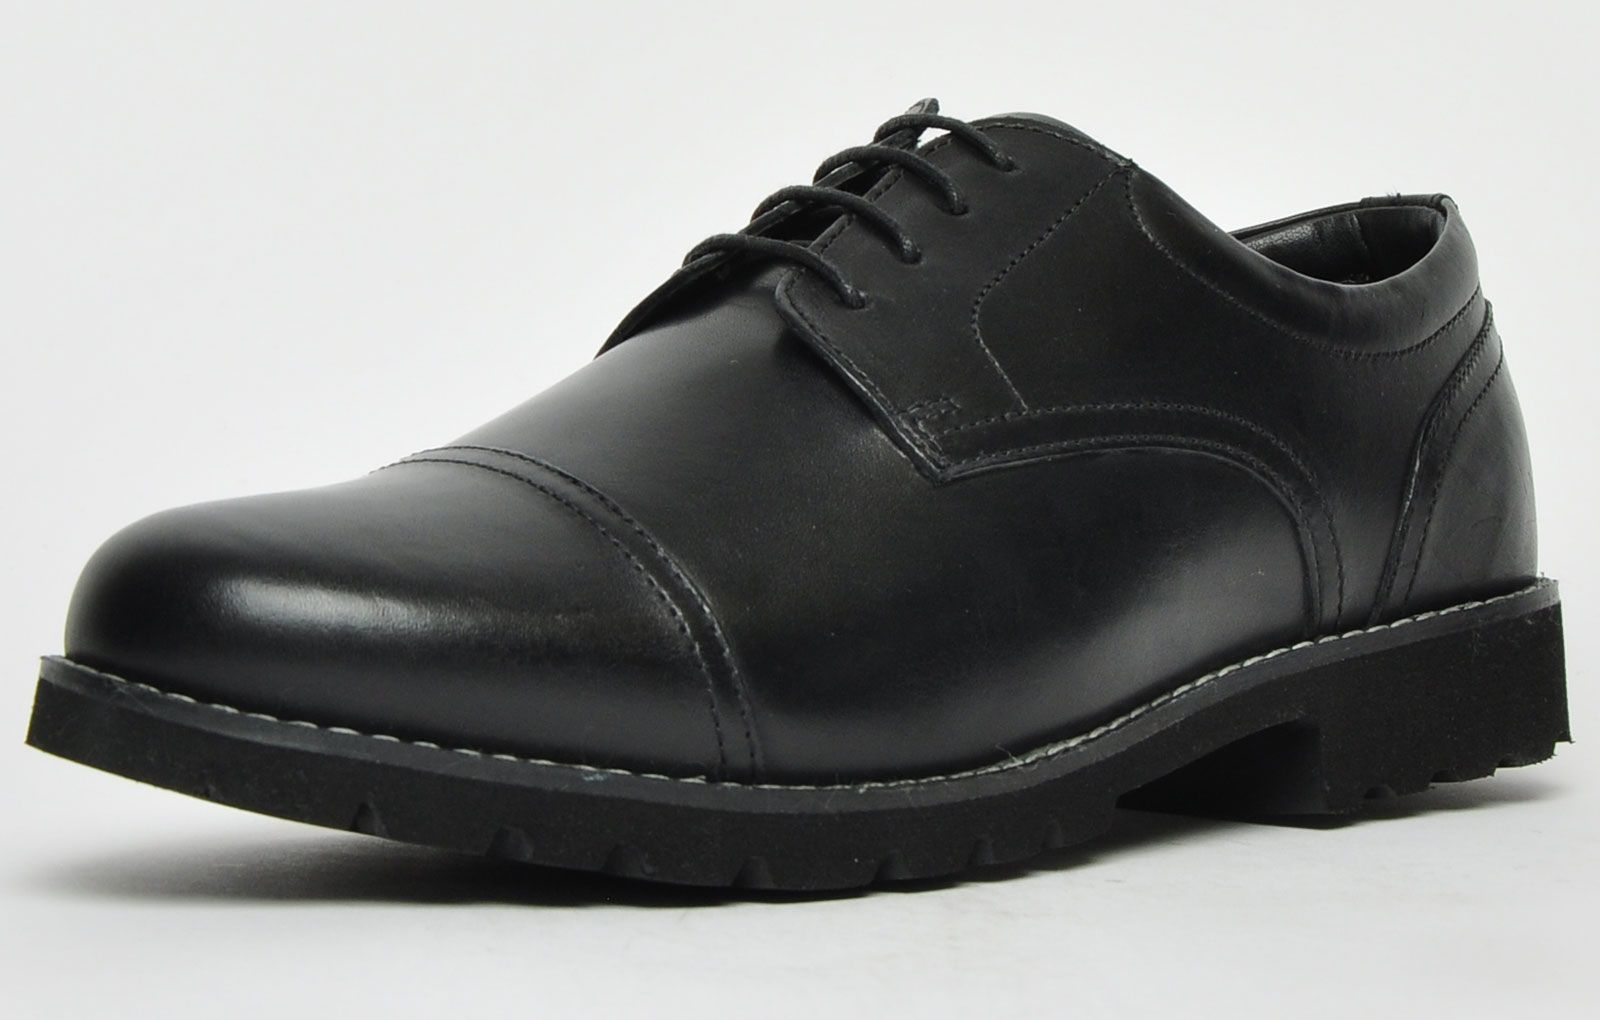 Designed with a high shine leather upper in an on-trend black colourway creating an iconic look and style for any casual or formal outfit. Sat on a durable outsole and paired with a soft padded inner, these Red Tape Oxford shoes boast ultra-comfort and sumptuous wear. Finished with classic detailing and Red Tape branding throughout for a fashionable finish to this designer shoe. <p class=